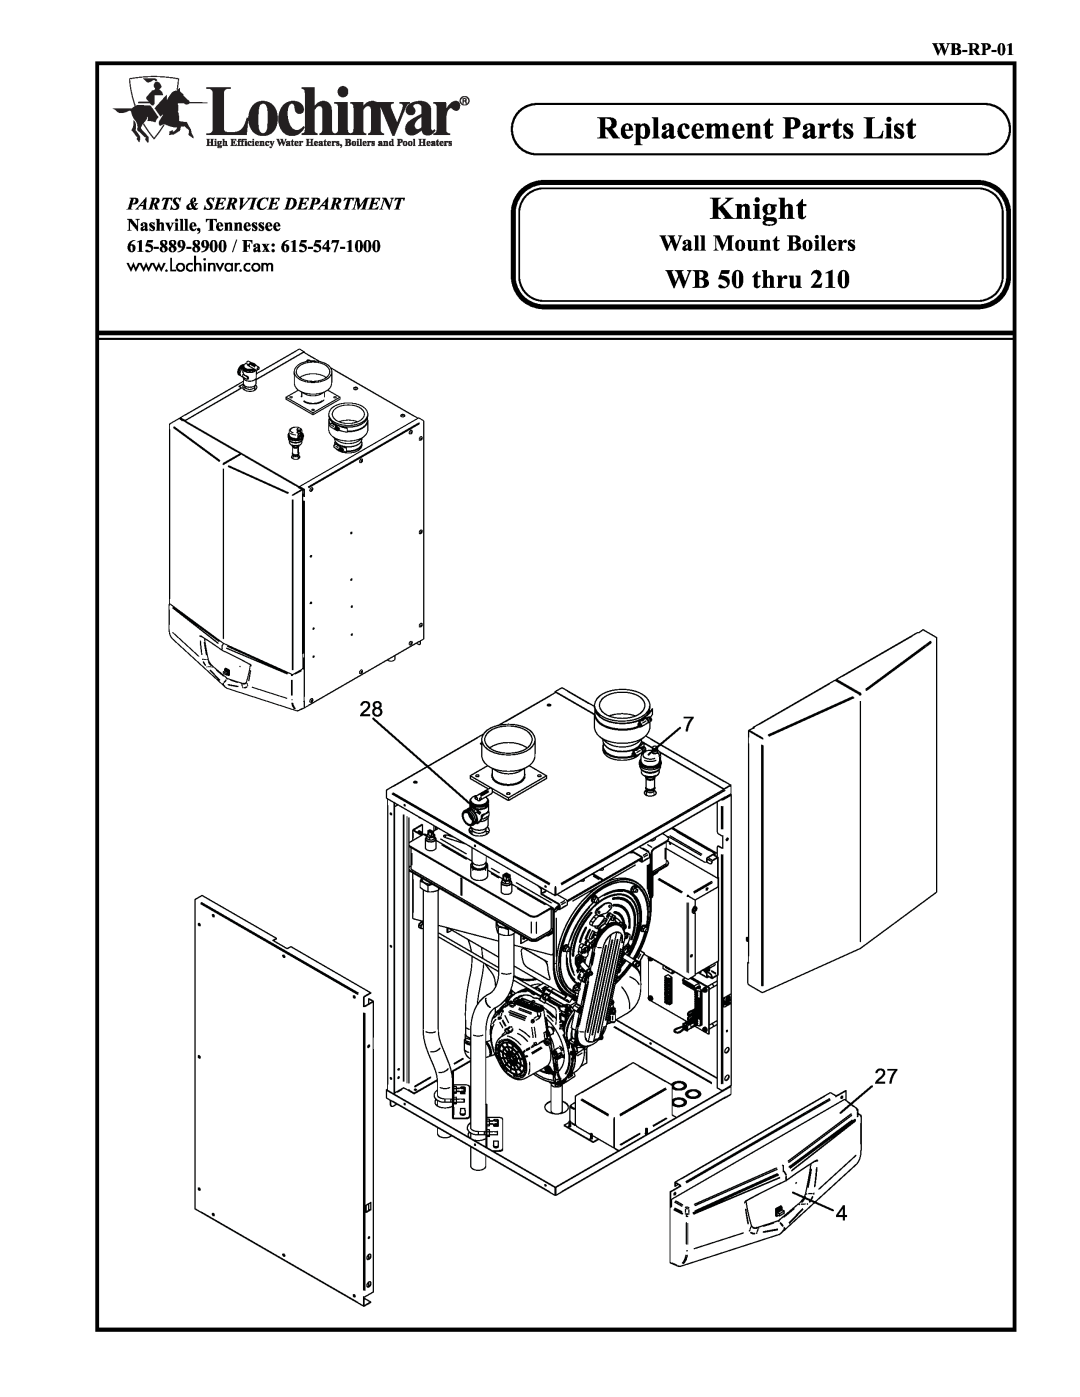 Lochinvar WB 50 thru 210 manual Replacement Parts List Knight, Wall Mount Boilers, WB-RP-01, Parts & Service Department 